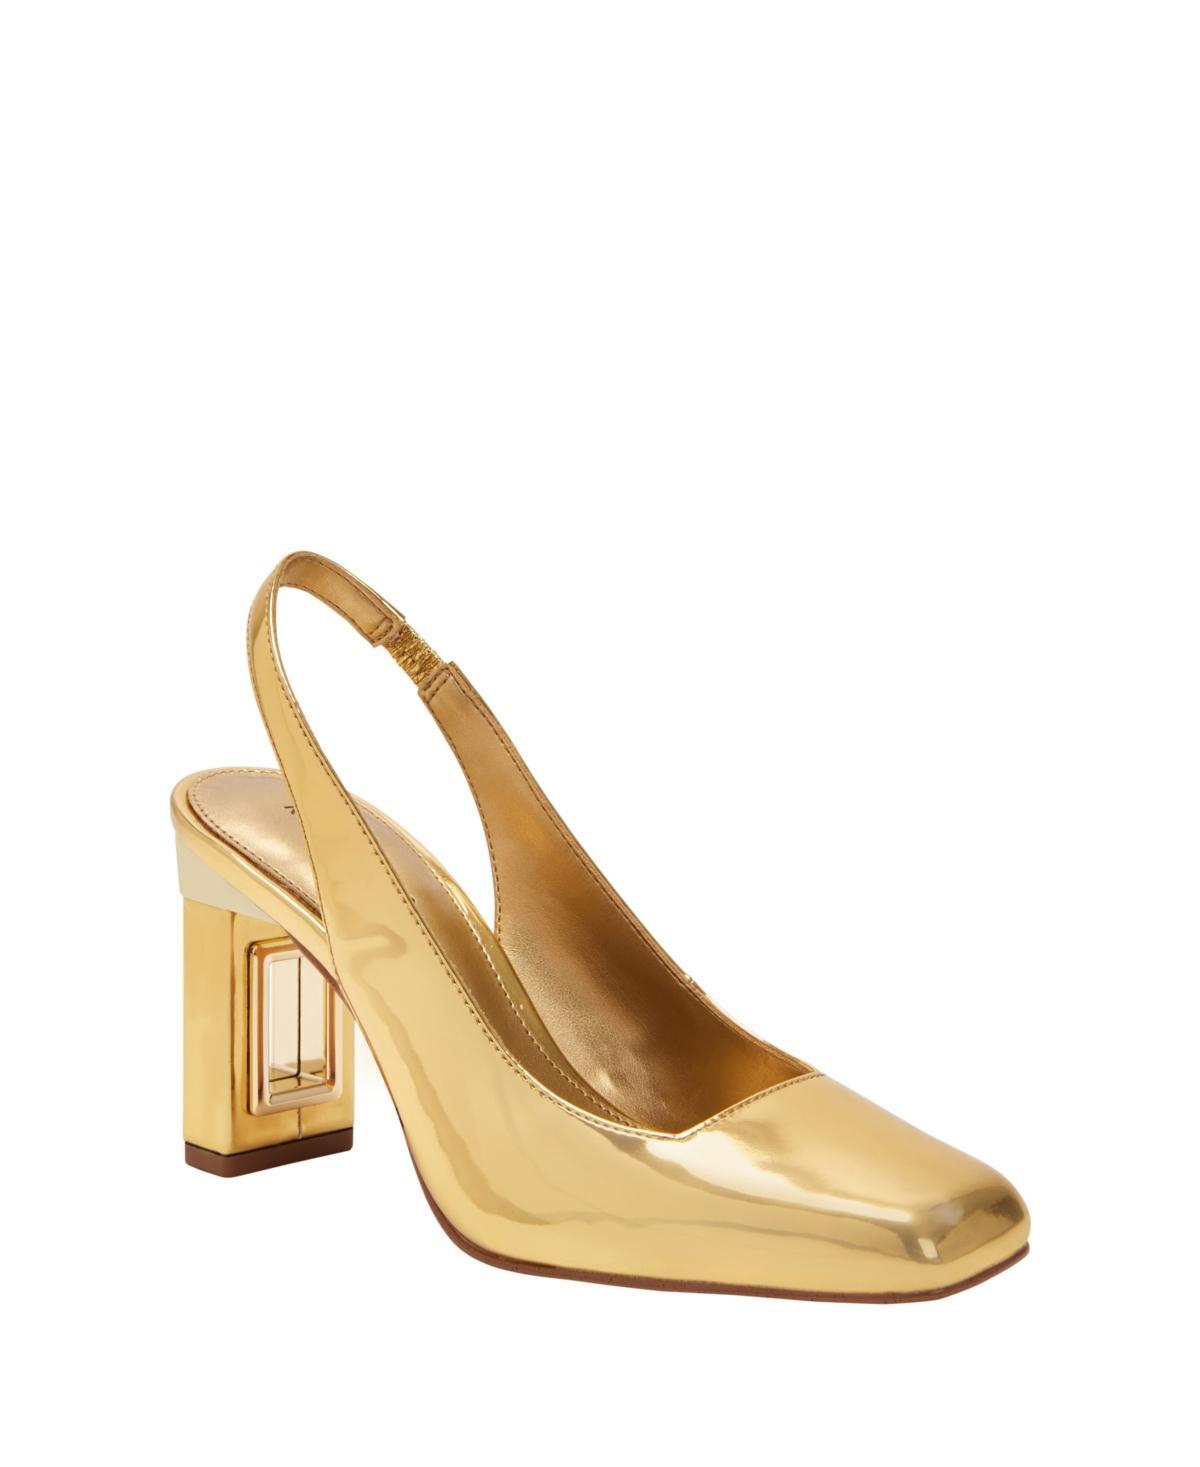 Katy Perry The Hollow Heel Slingback Pump Product Image